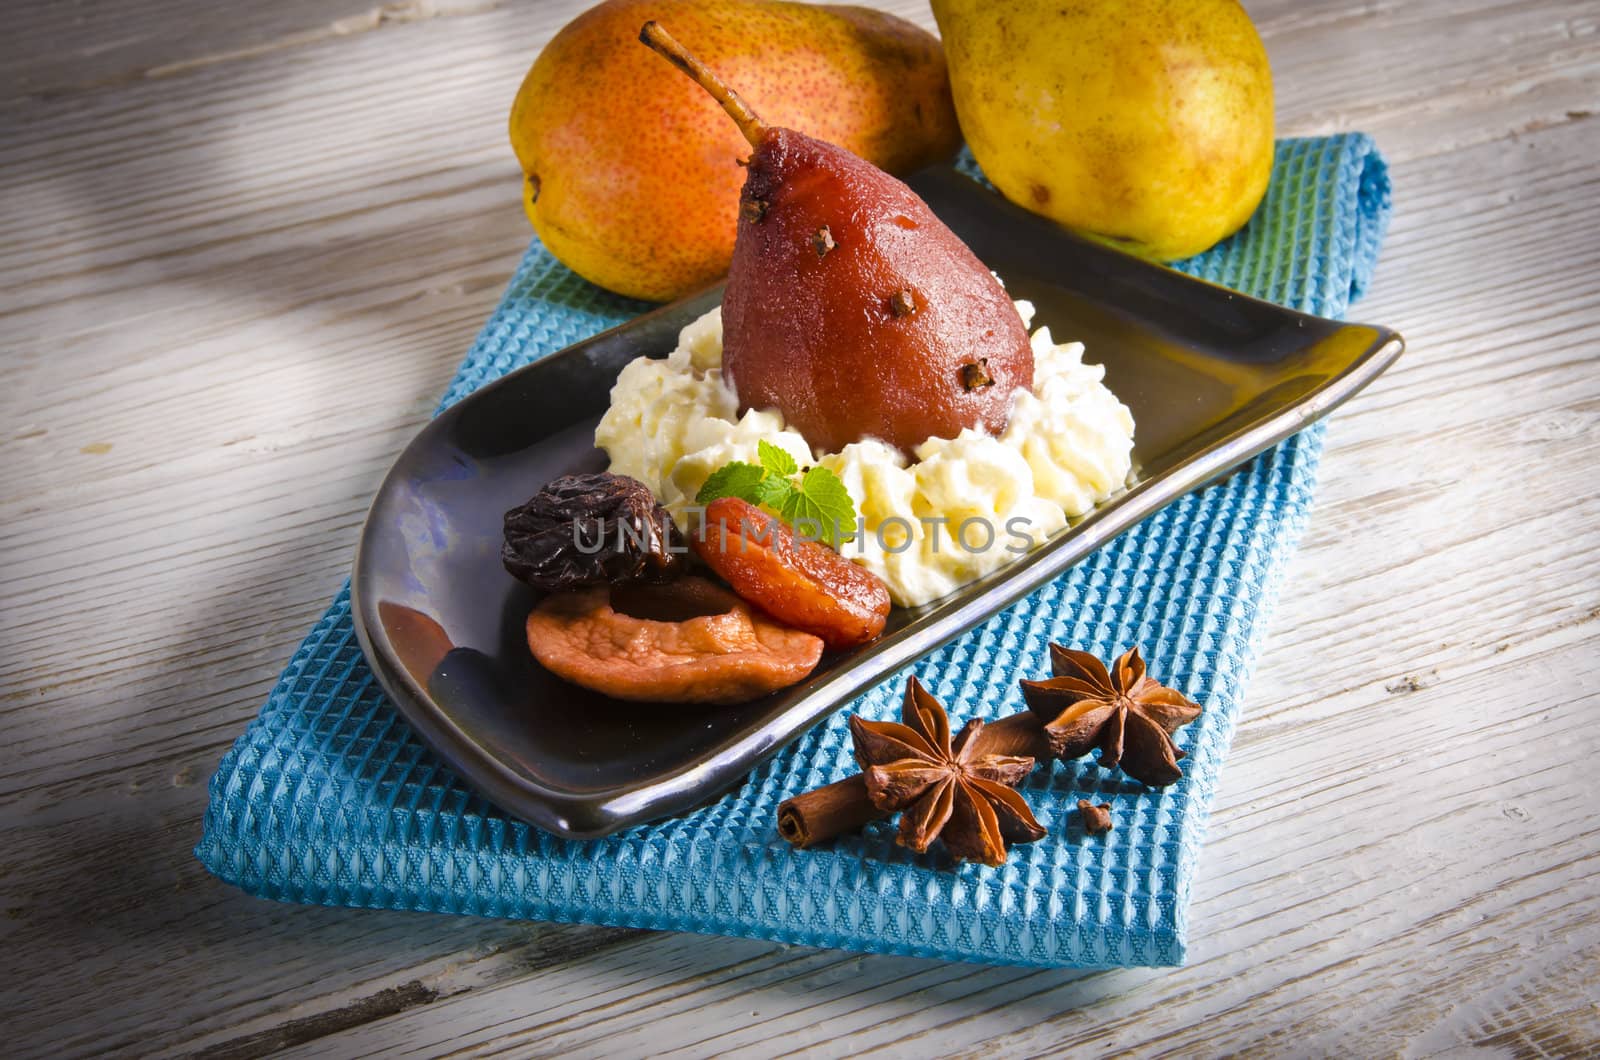 pear helene in red wine with spices